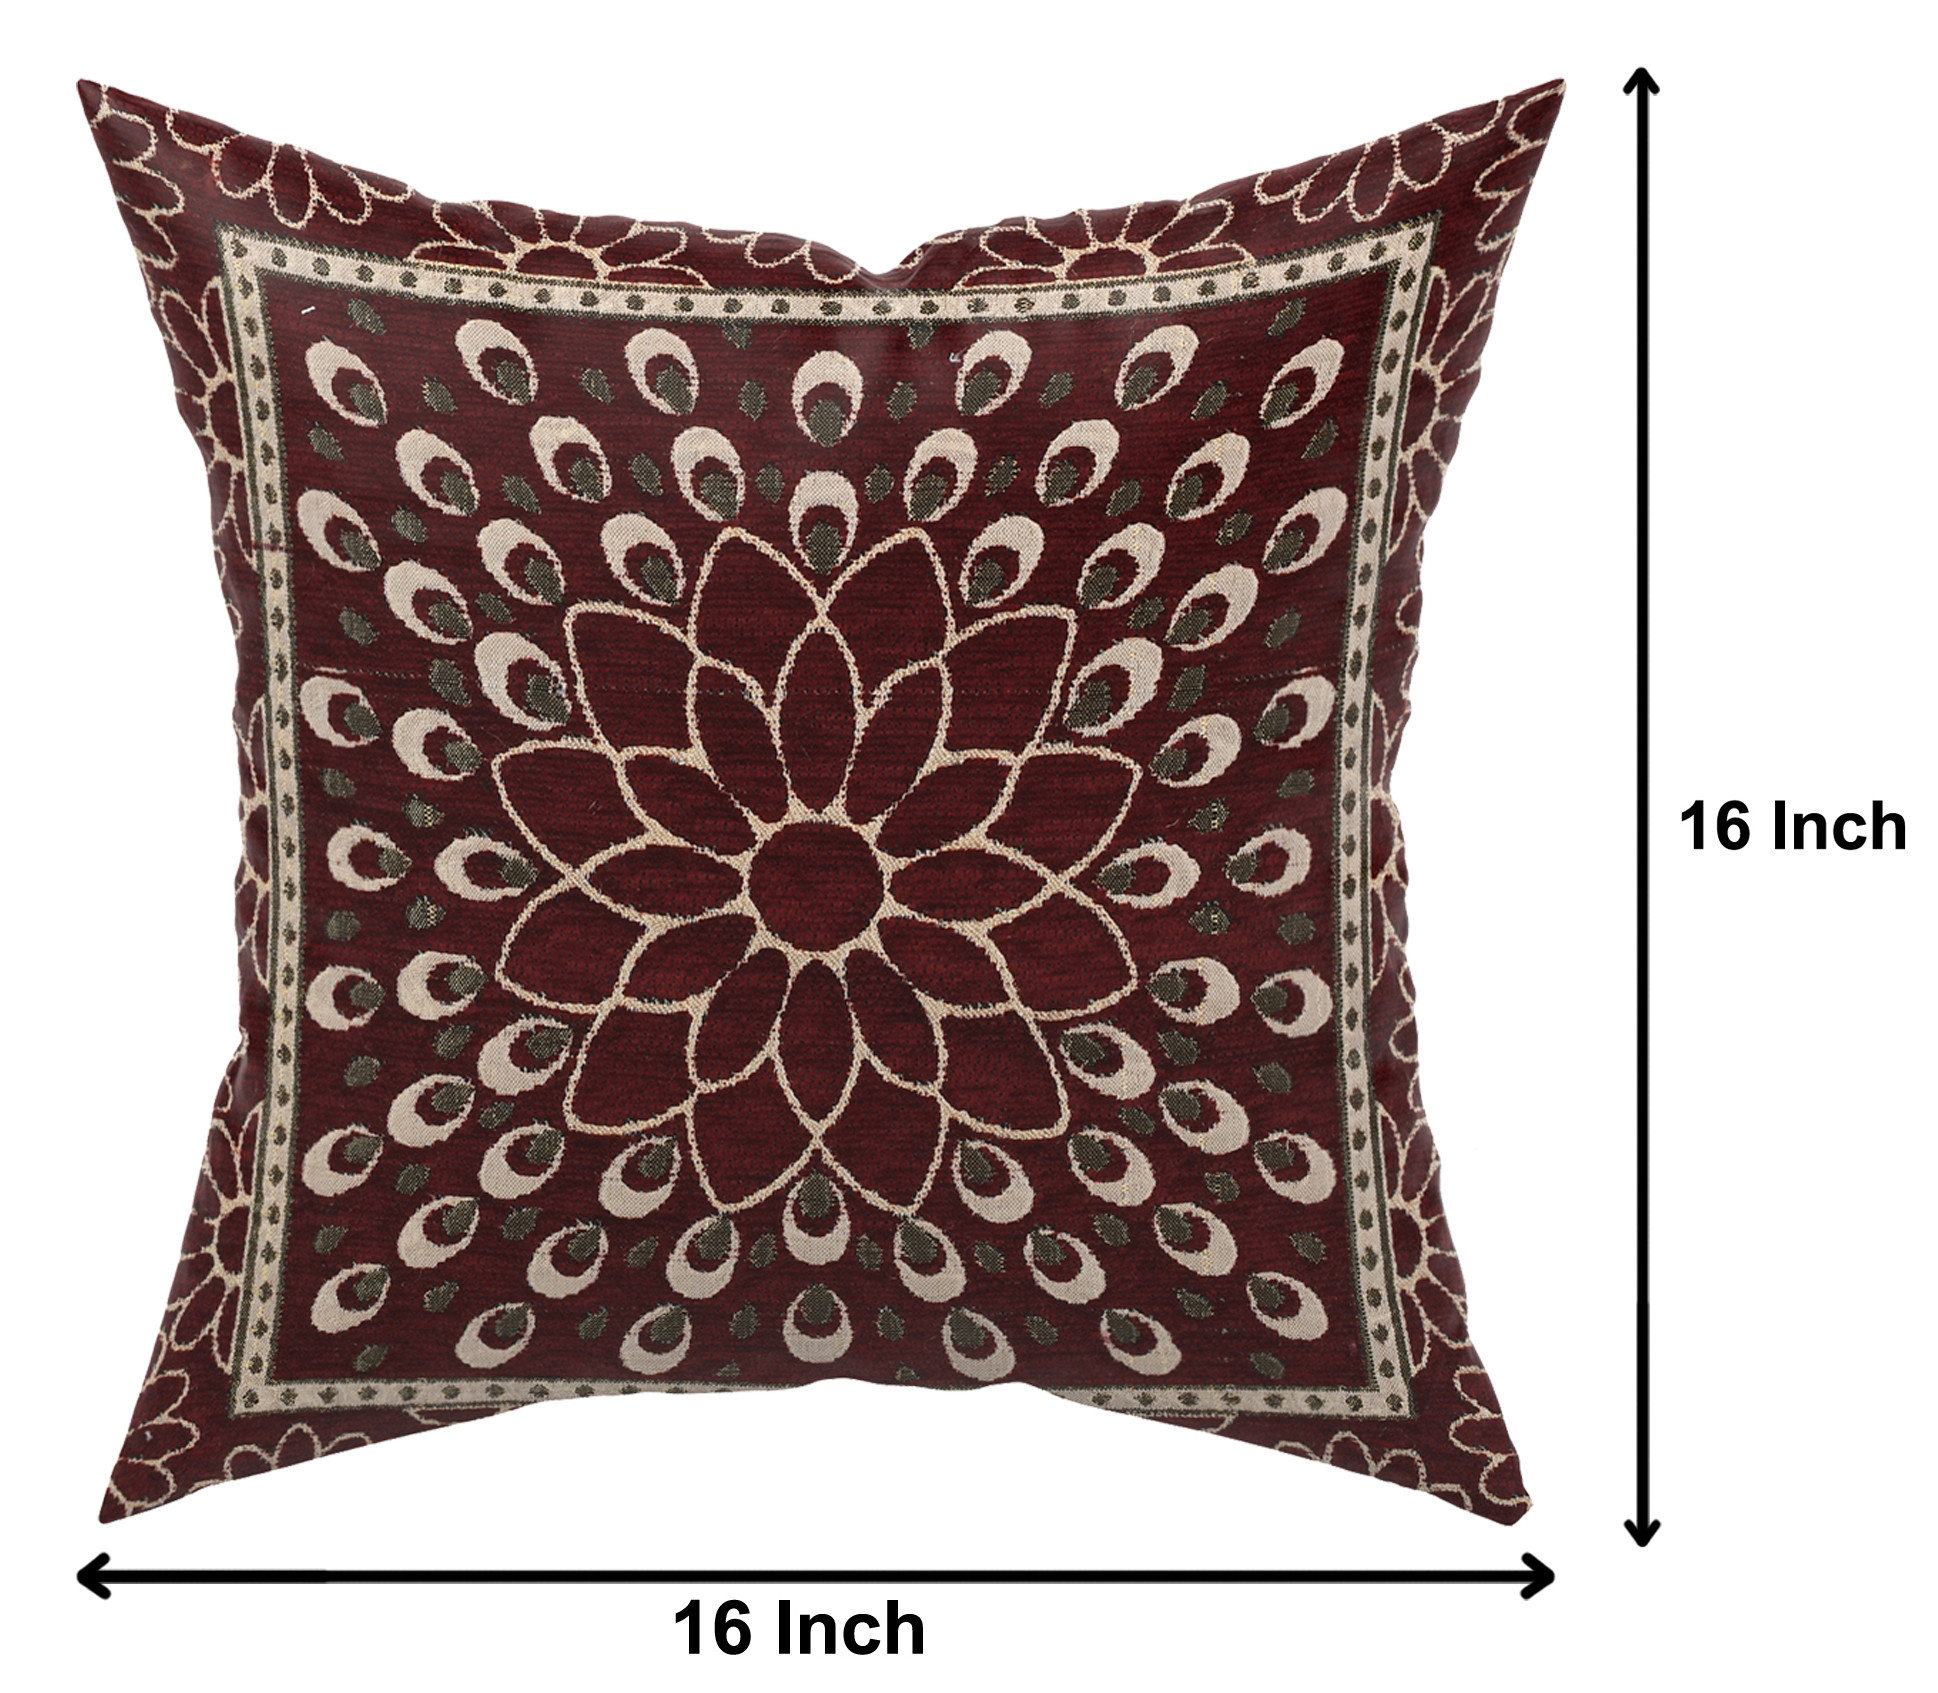 Kuber Industries Velvet Rangoli Design Soft Decorative Square Throw Pillow Cover, Cushion Covers, Pillow Case For Sofa Couch Bed Chair 16x16 Inch-(Maroon)